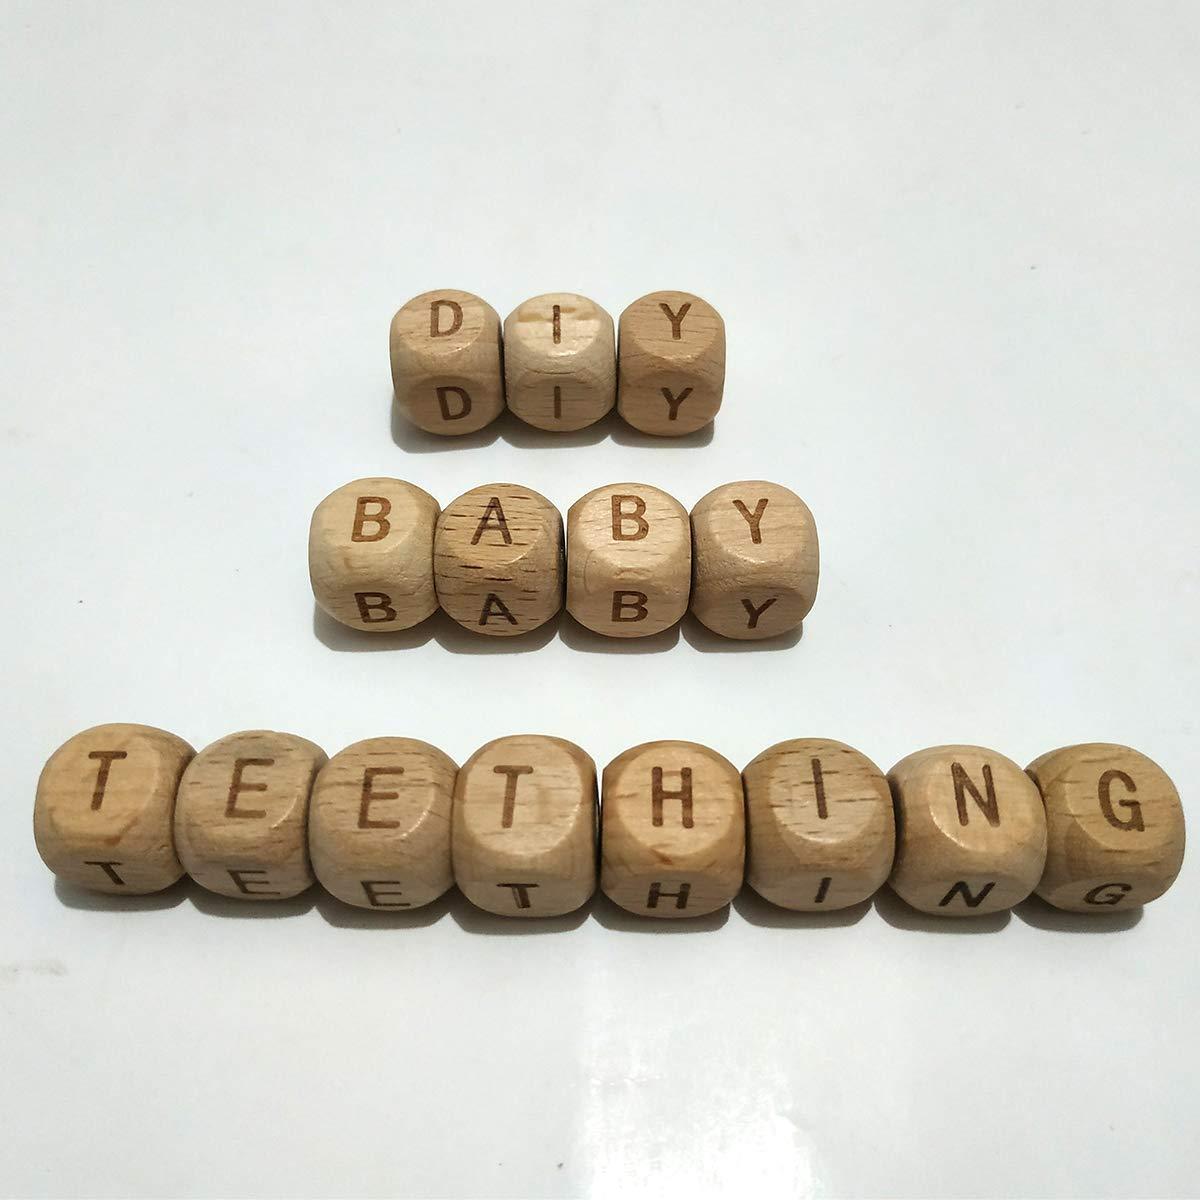 12MM Square Wood Letter Beads